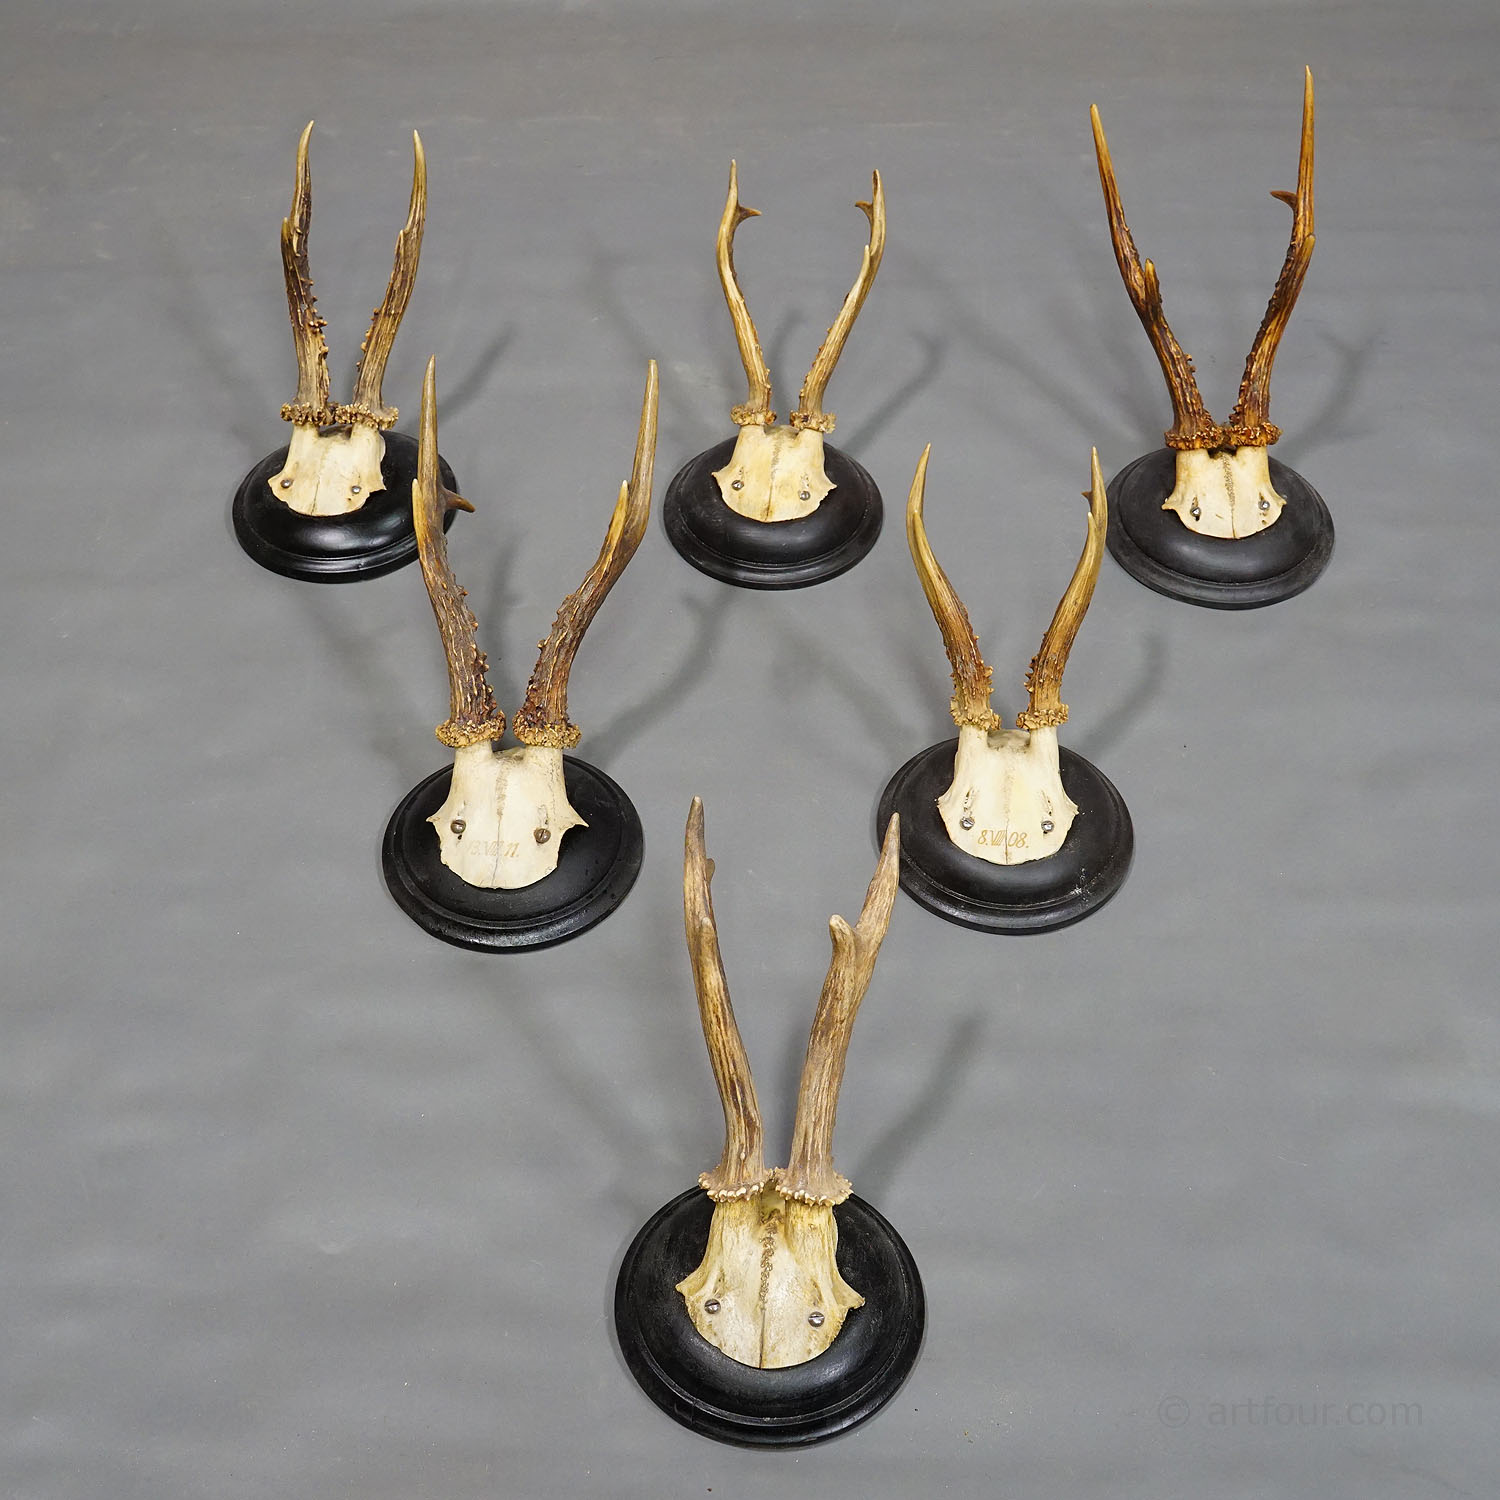 Six Antique Deer Trophies on Wooden Plaques Germany ca. 1900